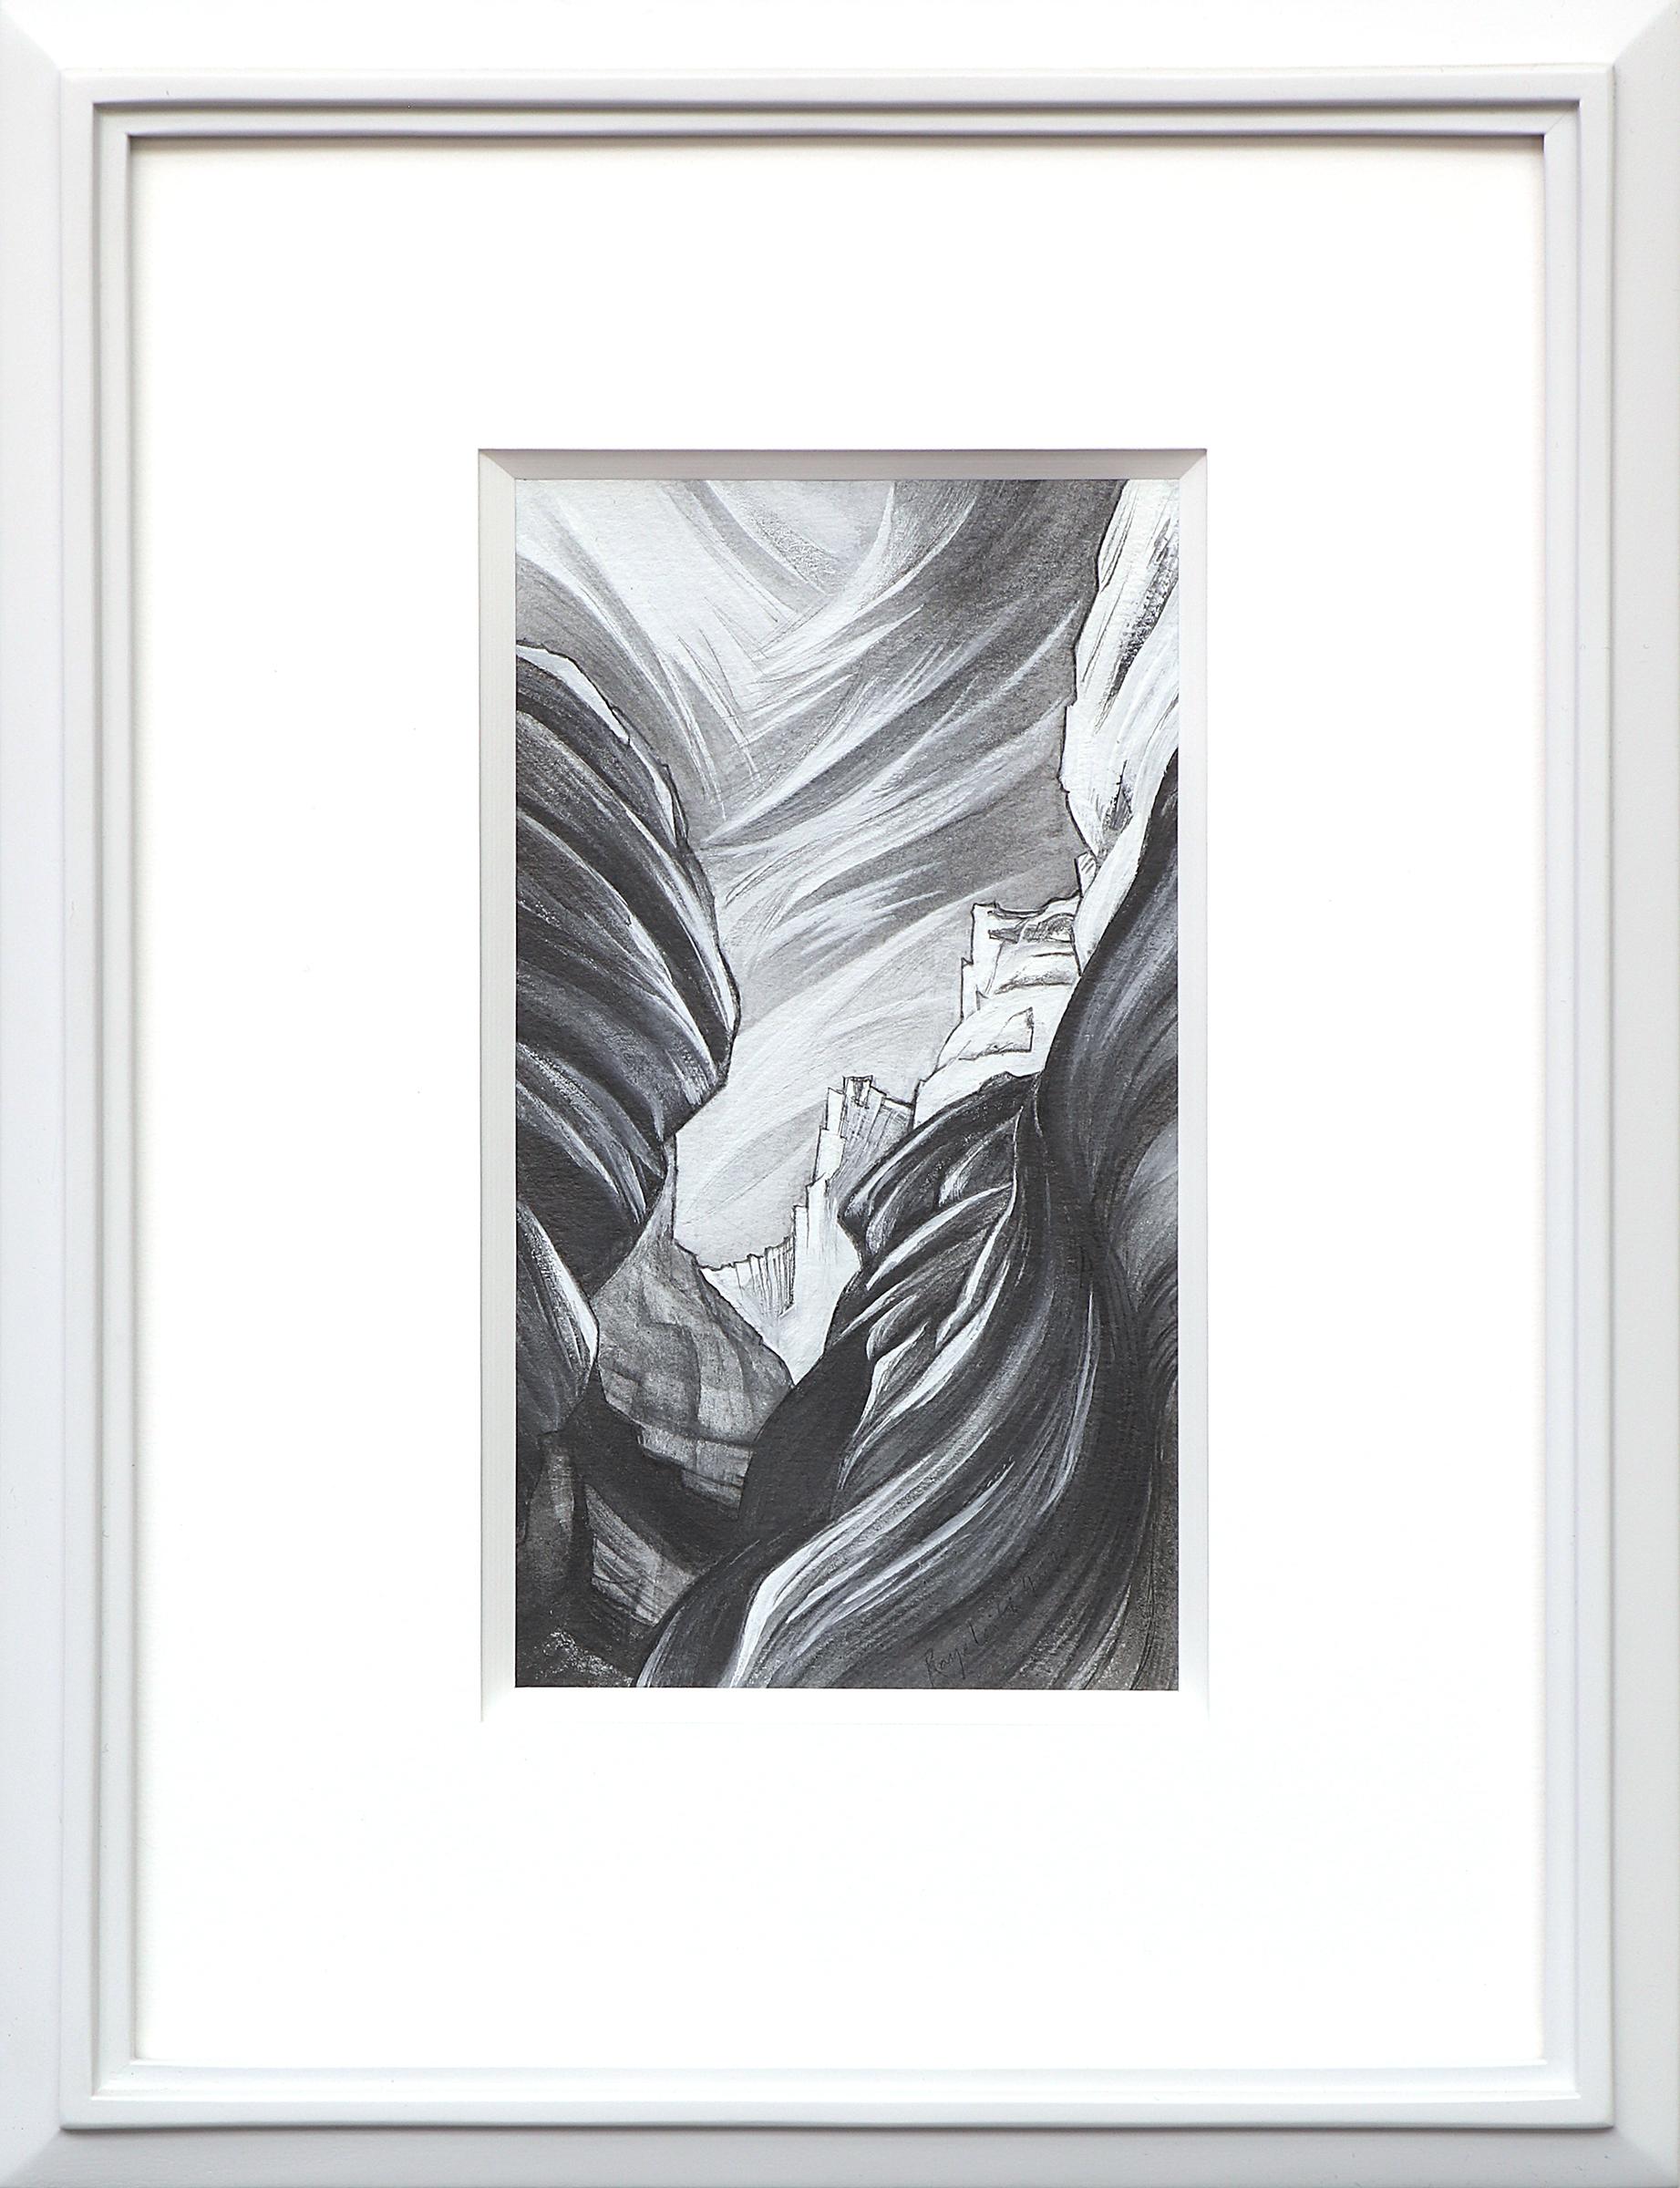 Pair of Abstract Graphite Casein Southwestern Landscape Drawings, Black White 6